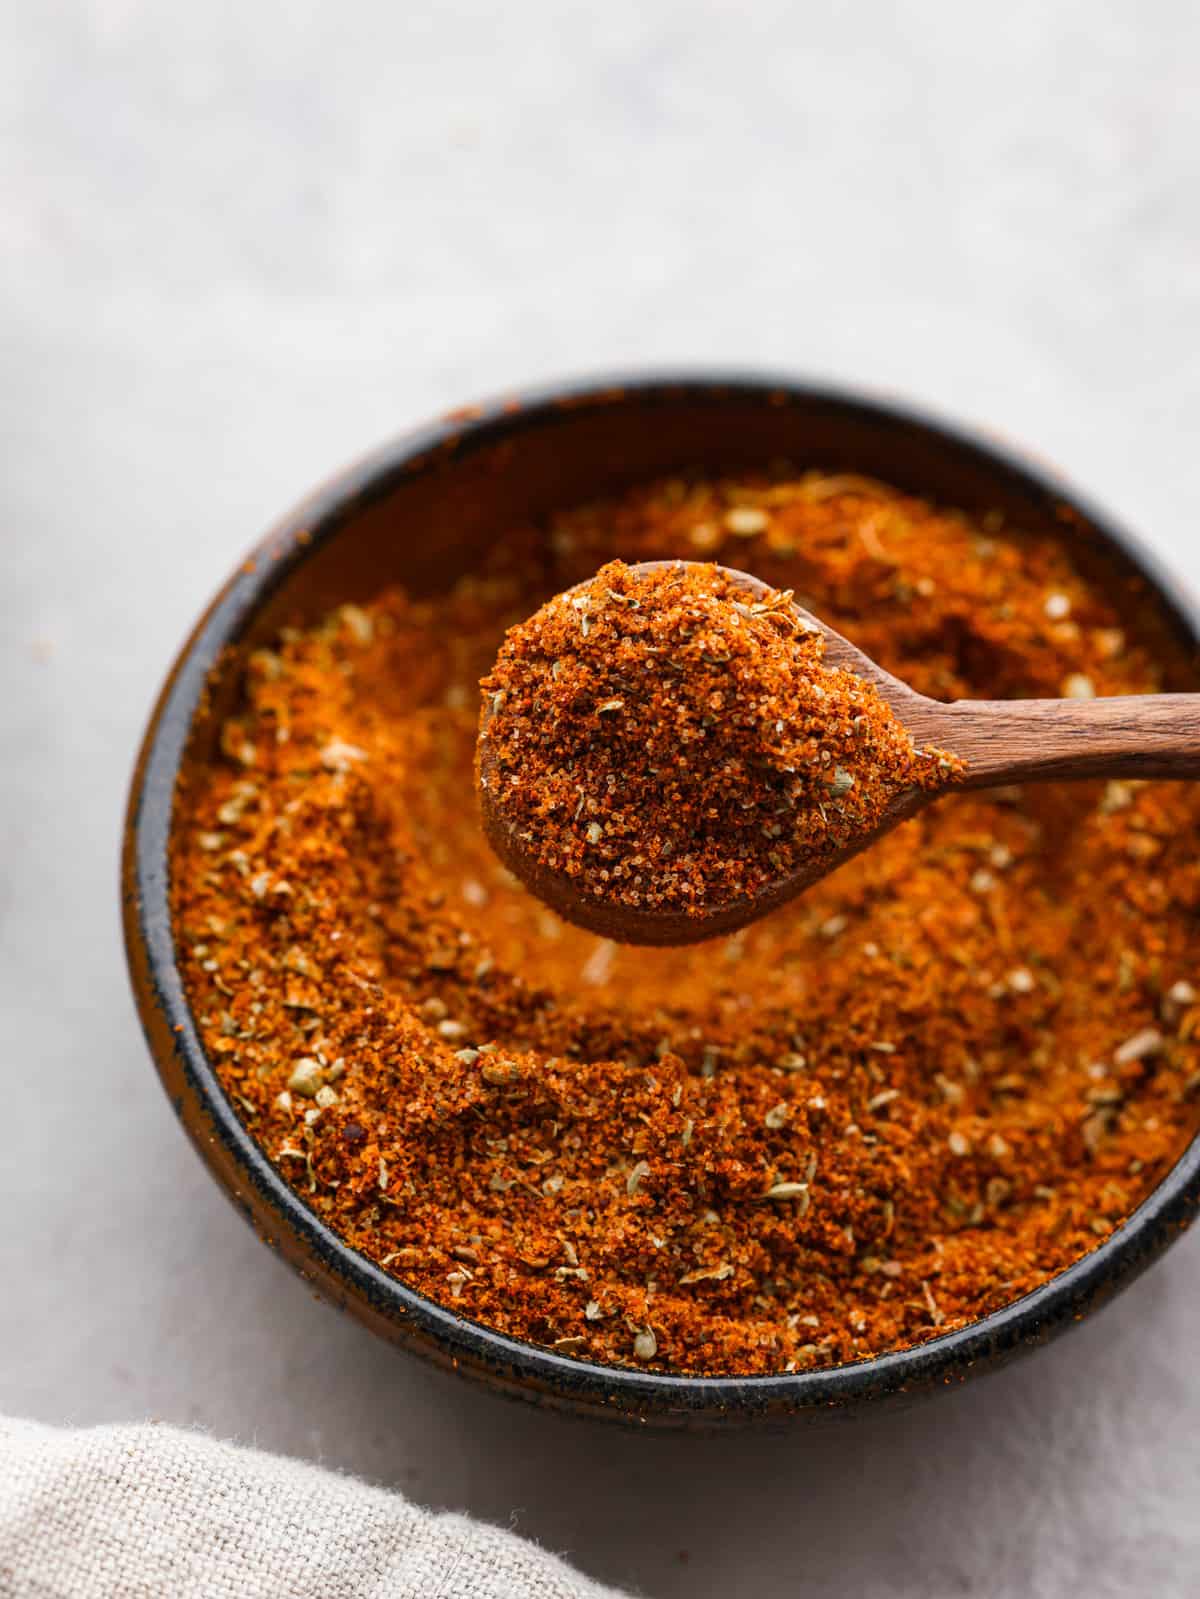 How to Make Your Own Creole or Cajun Seasoning - Getty Stewart